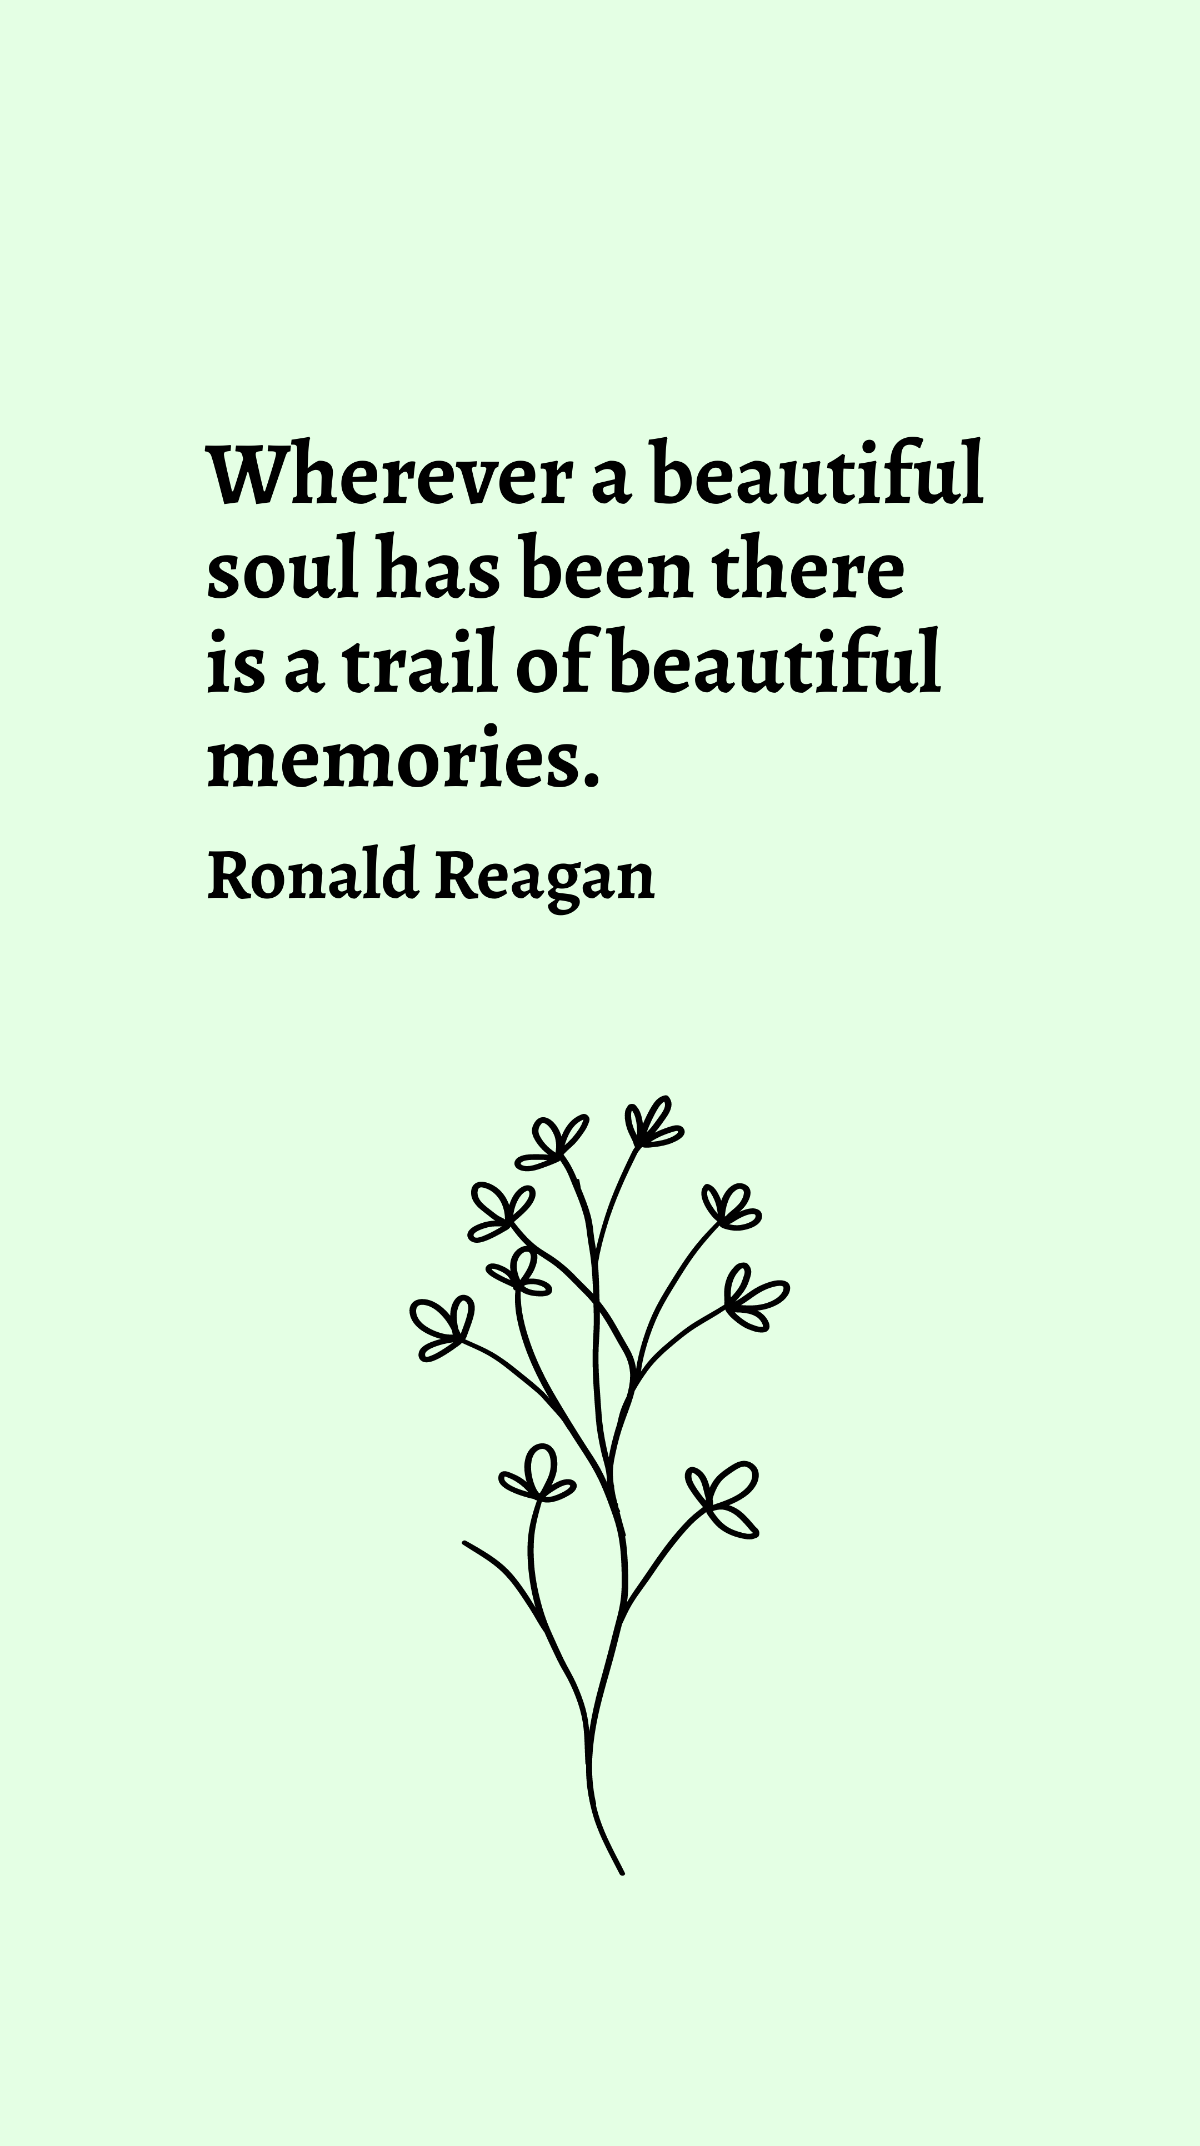 Ronald Reagan - Wherever a beautiful soul has been there is a trail of beautiful memories. Template